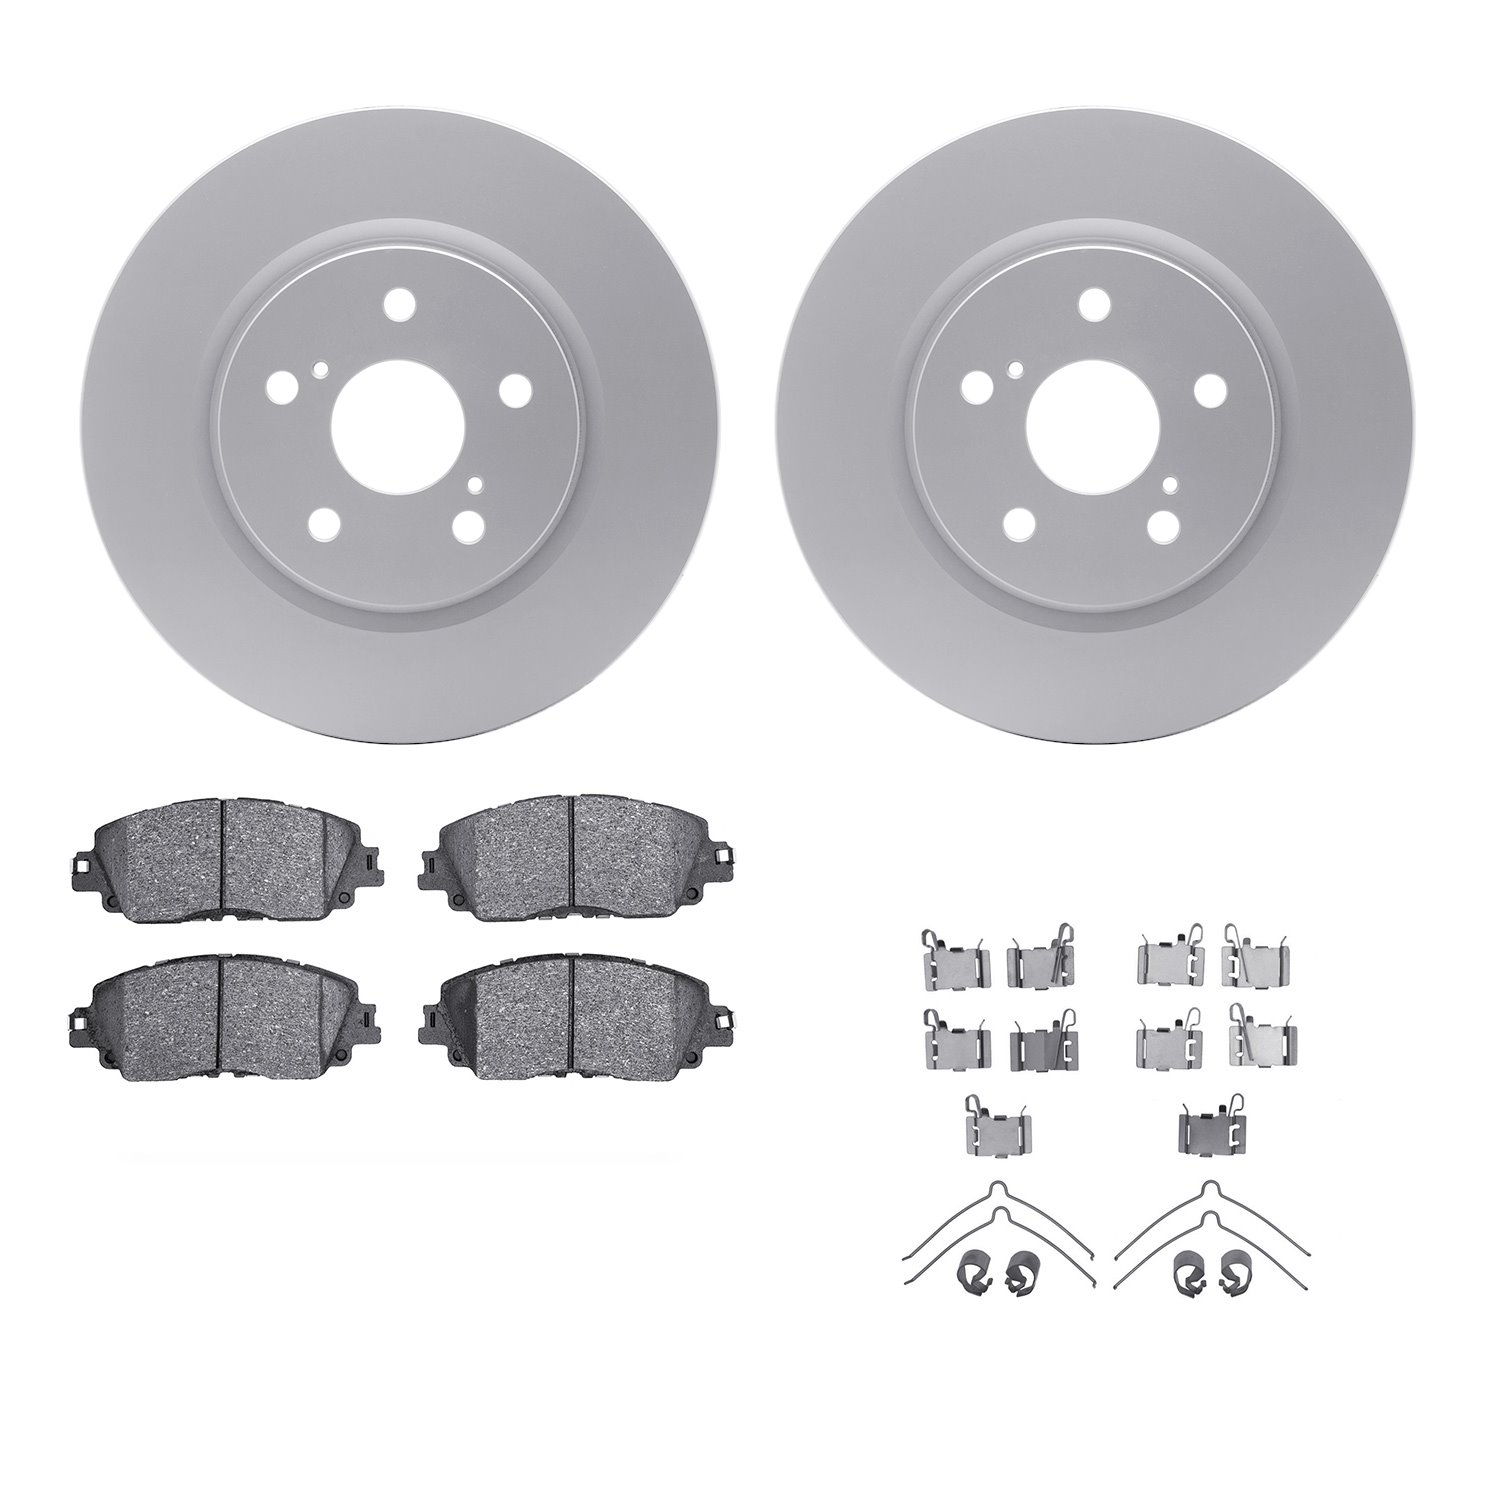 4312-76094 Geospec Brake Rotors with 3000-Series Ceramic Brake Pads & Hardware, Fits Select Lexus/Toyota/Scion, Position: Front